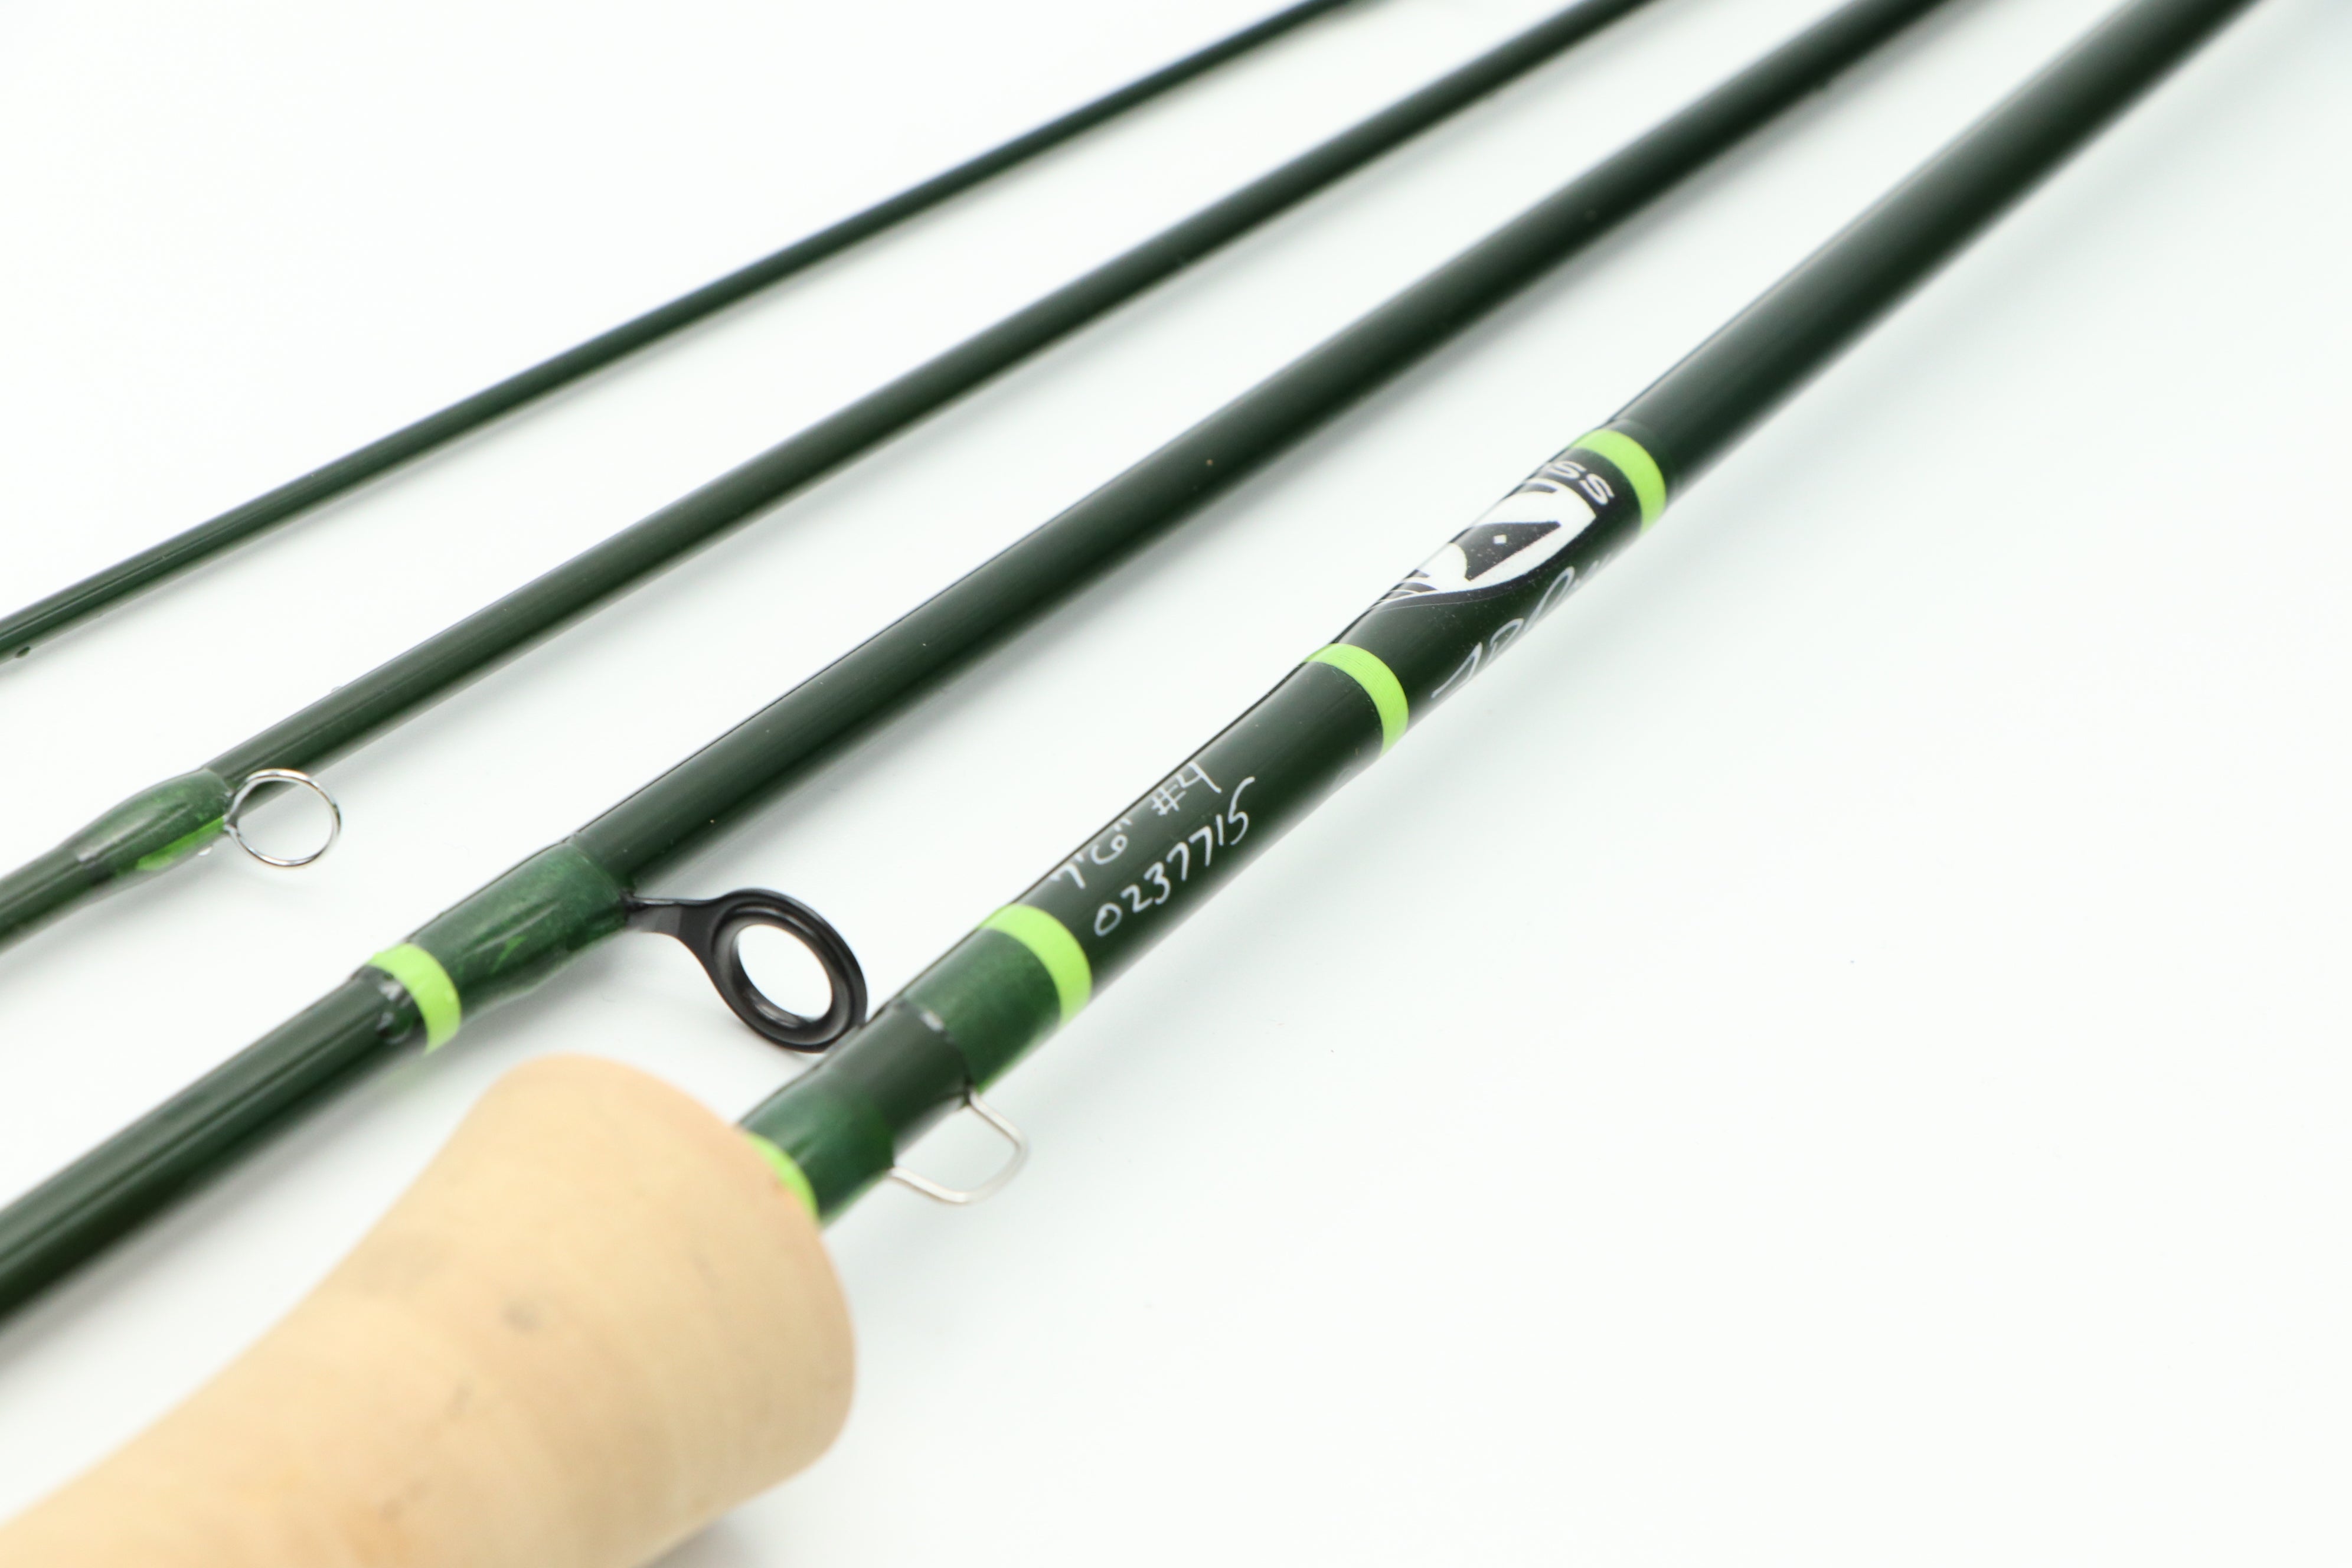 Coherence Fly Rod 4,5,6, model for freshwater, 4 piece Medium Fast